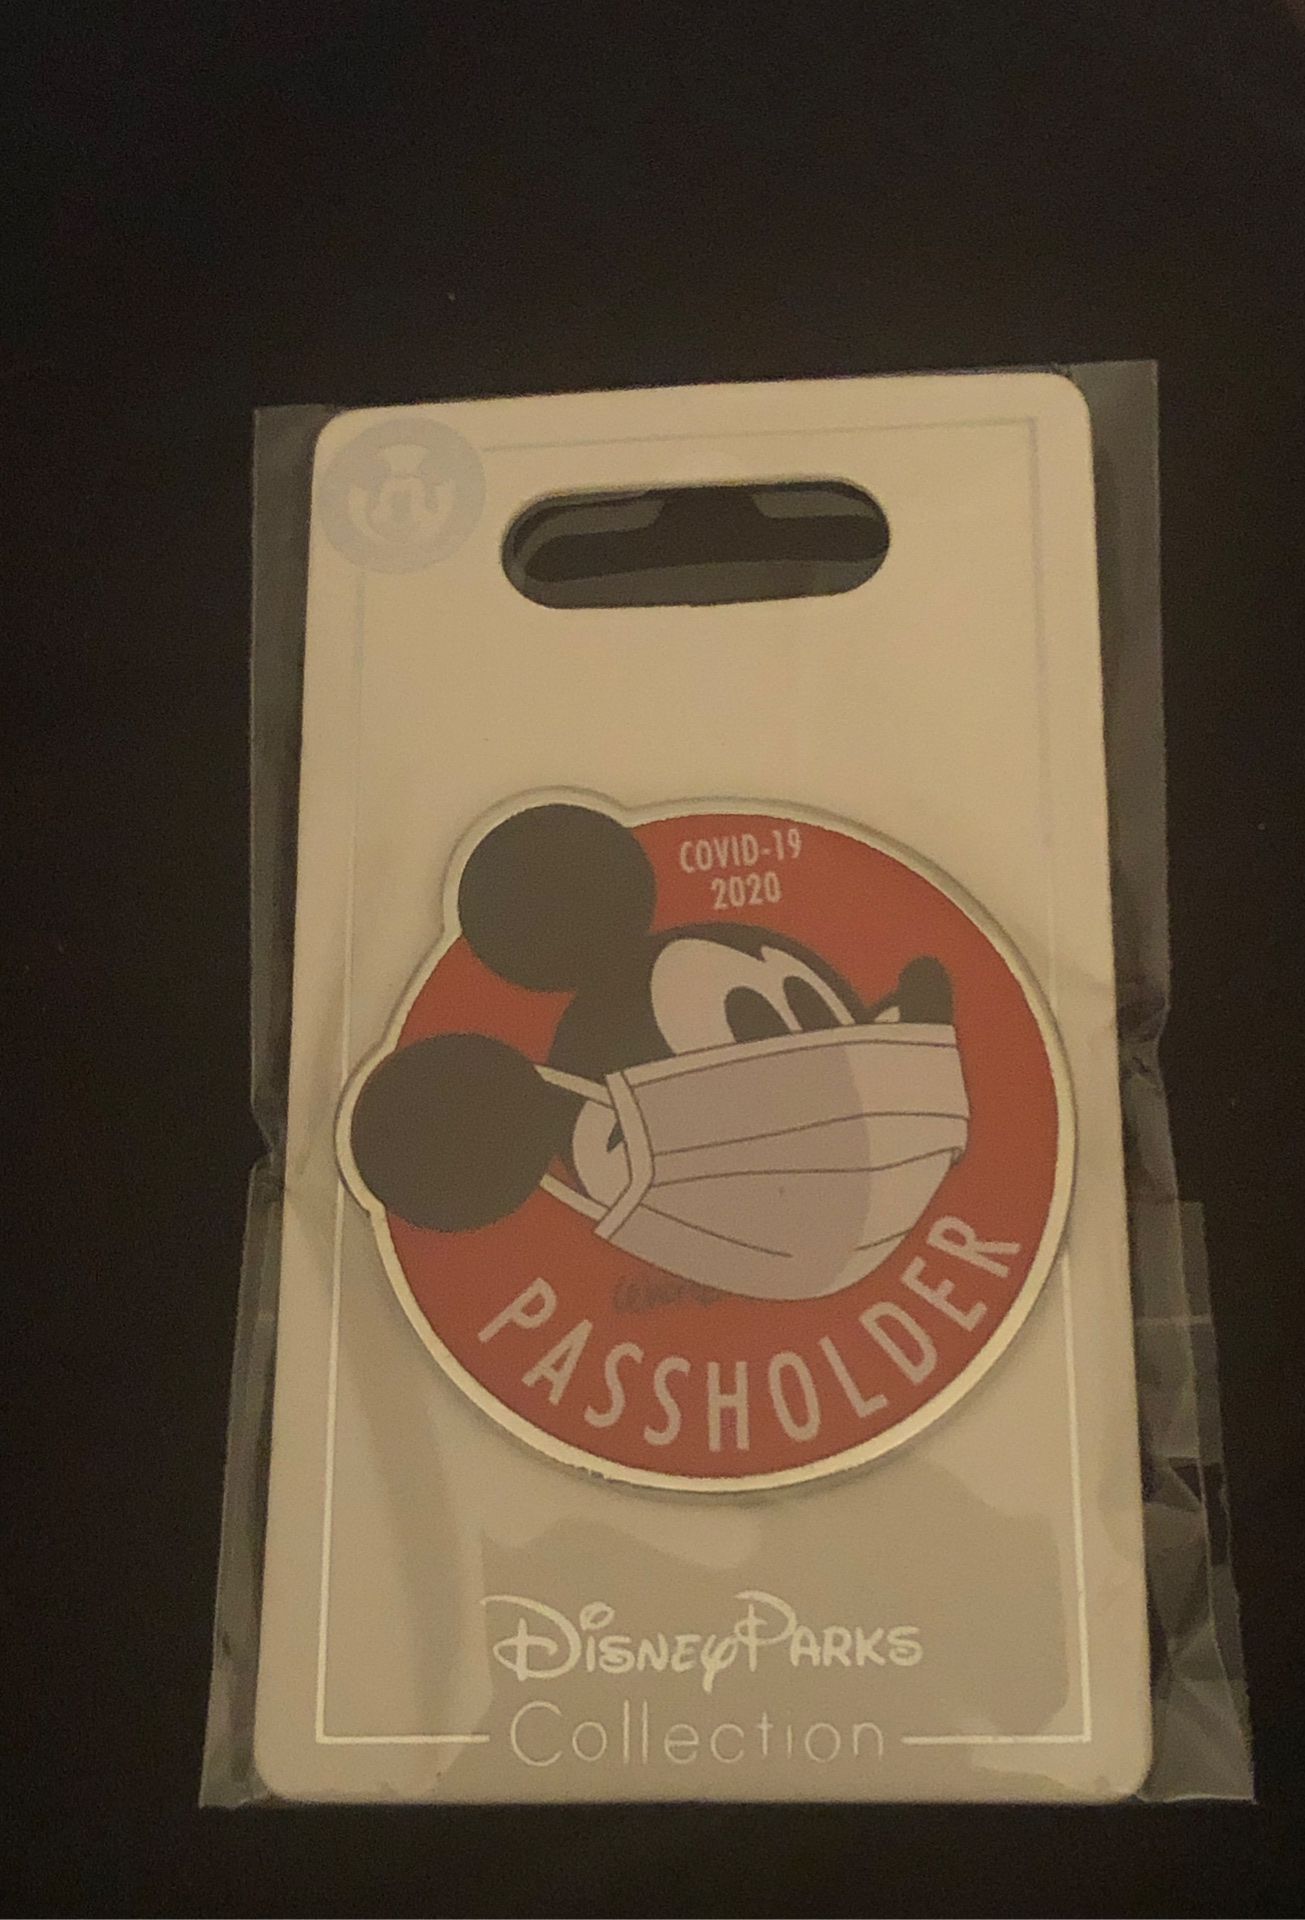 (NEW) Disney Parks Collection PASSHOLDER 2020 MICKEY PIN WITH COVID-19 MASK